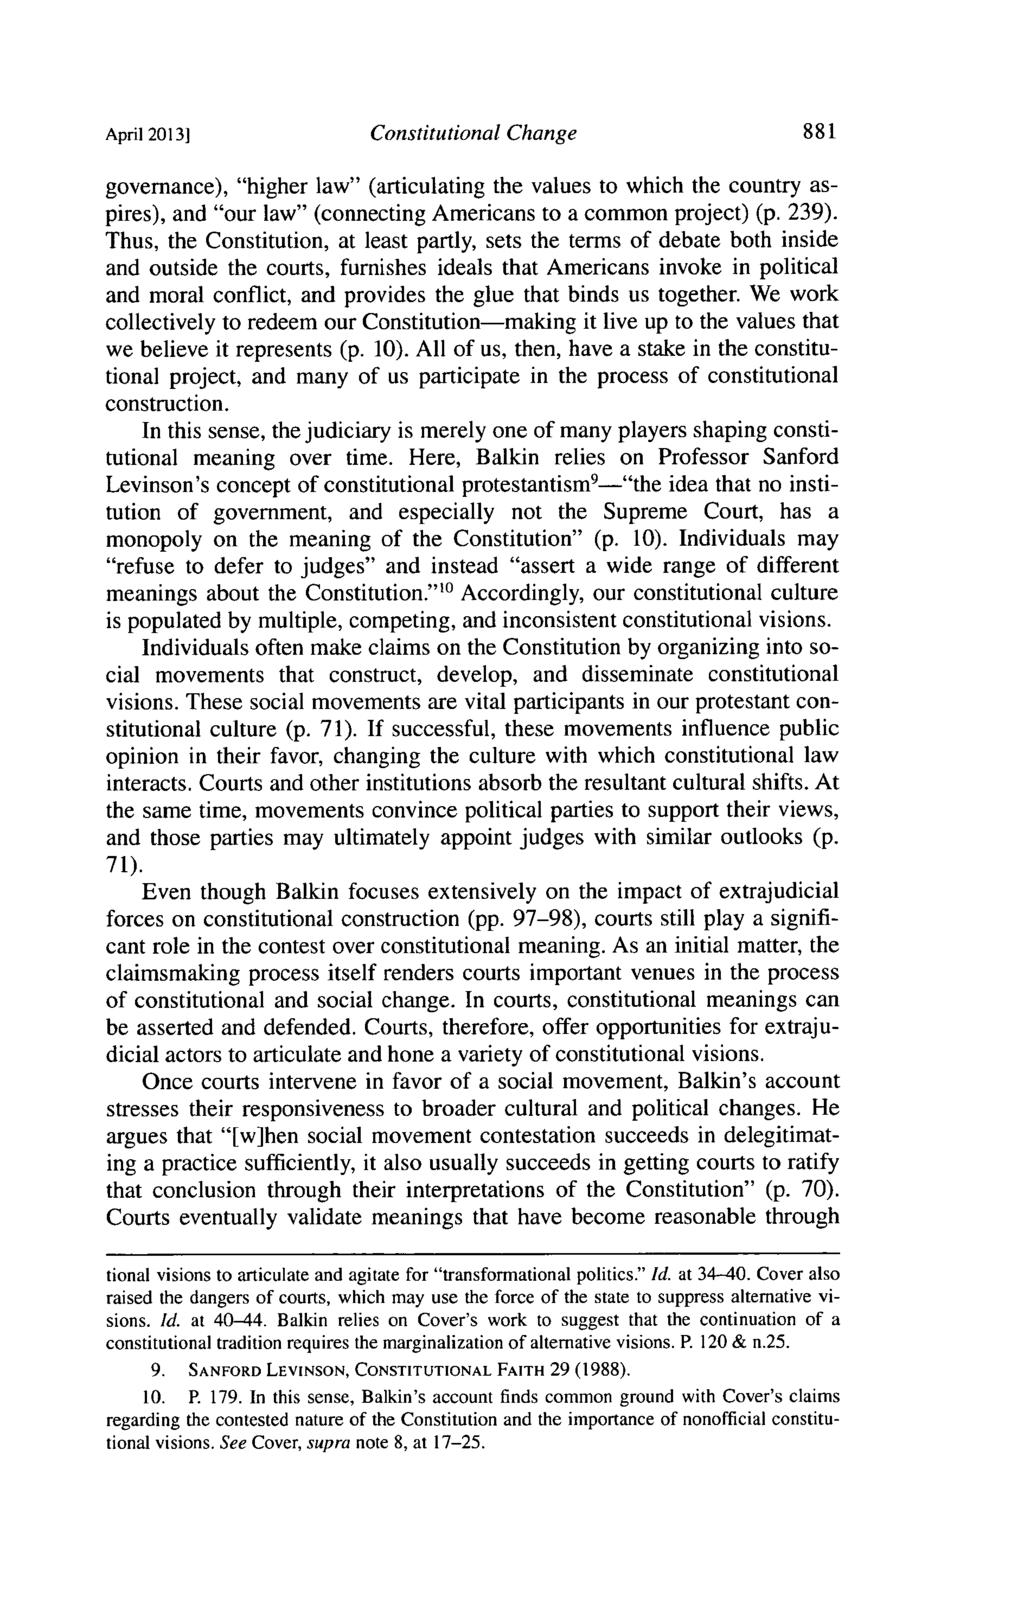 April 2013] Constitutional Change governance), "higher law" (articulating the values to which the country aspires), and "our law" (connecting Americans to a common project) (p. 239).